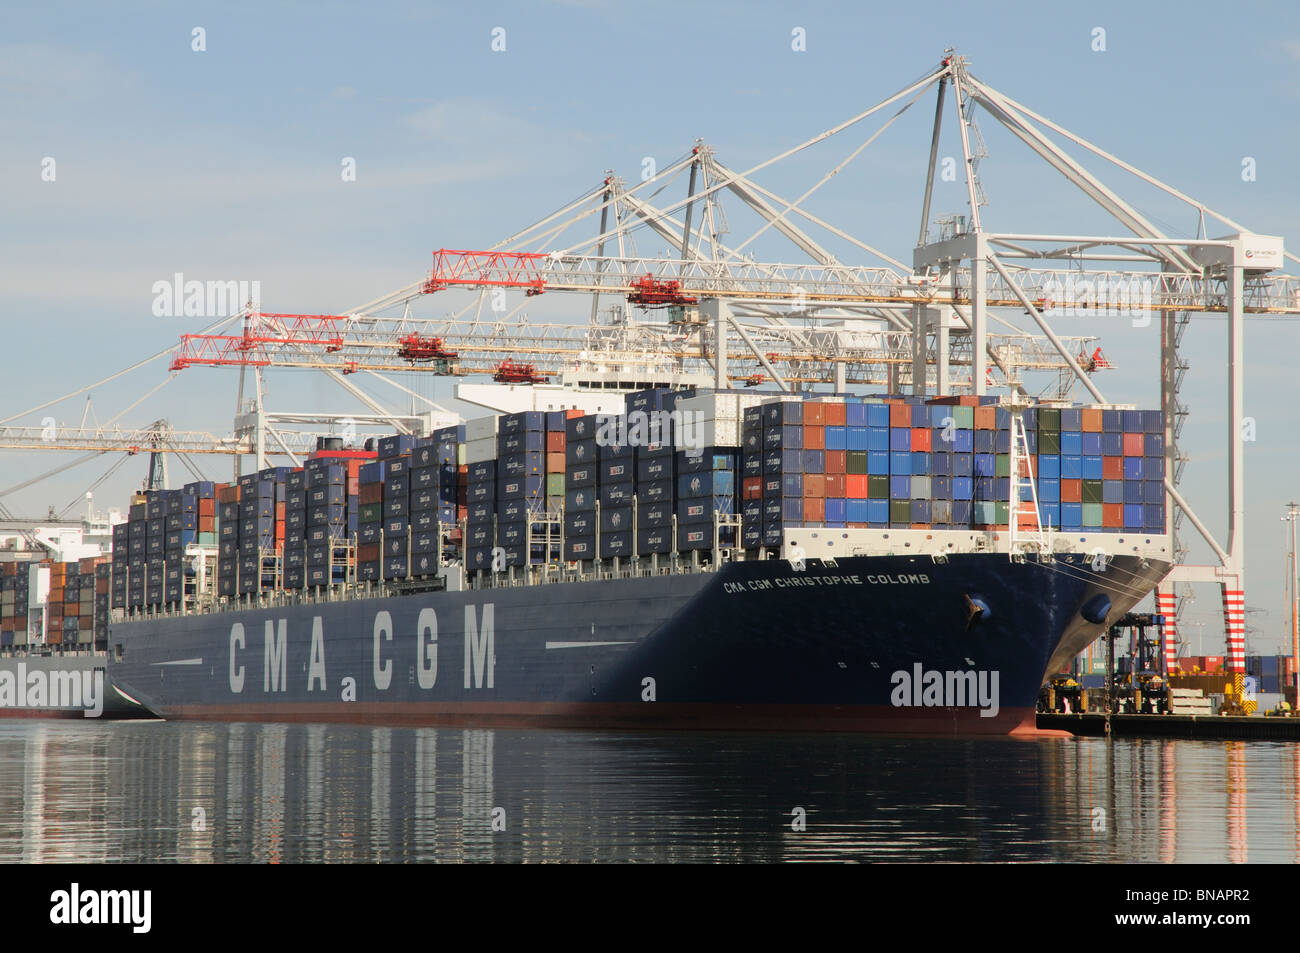 One of the worlds largest container ships the CMA CGM Christophe Colomb on the quayside at DP World Southampton England UK Stock Photo